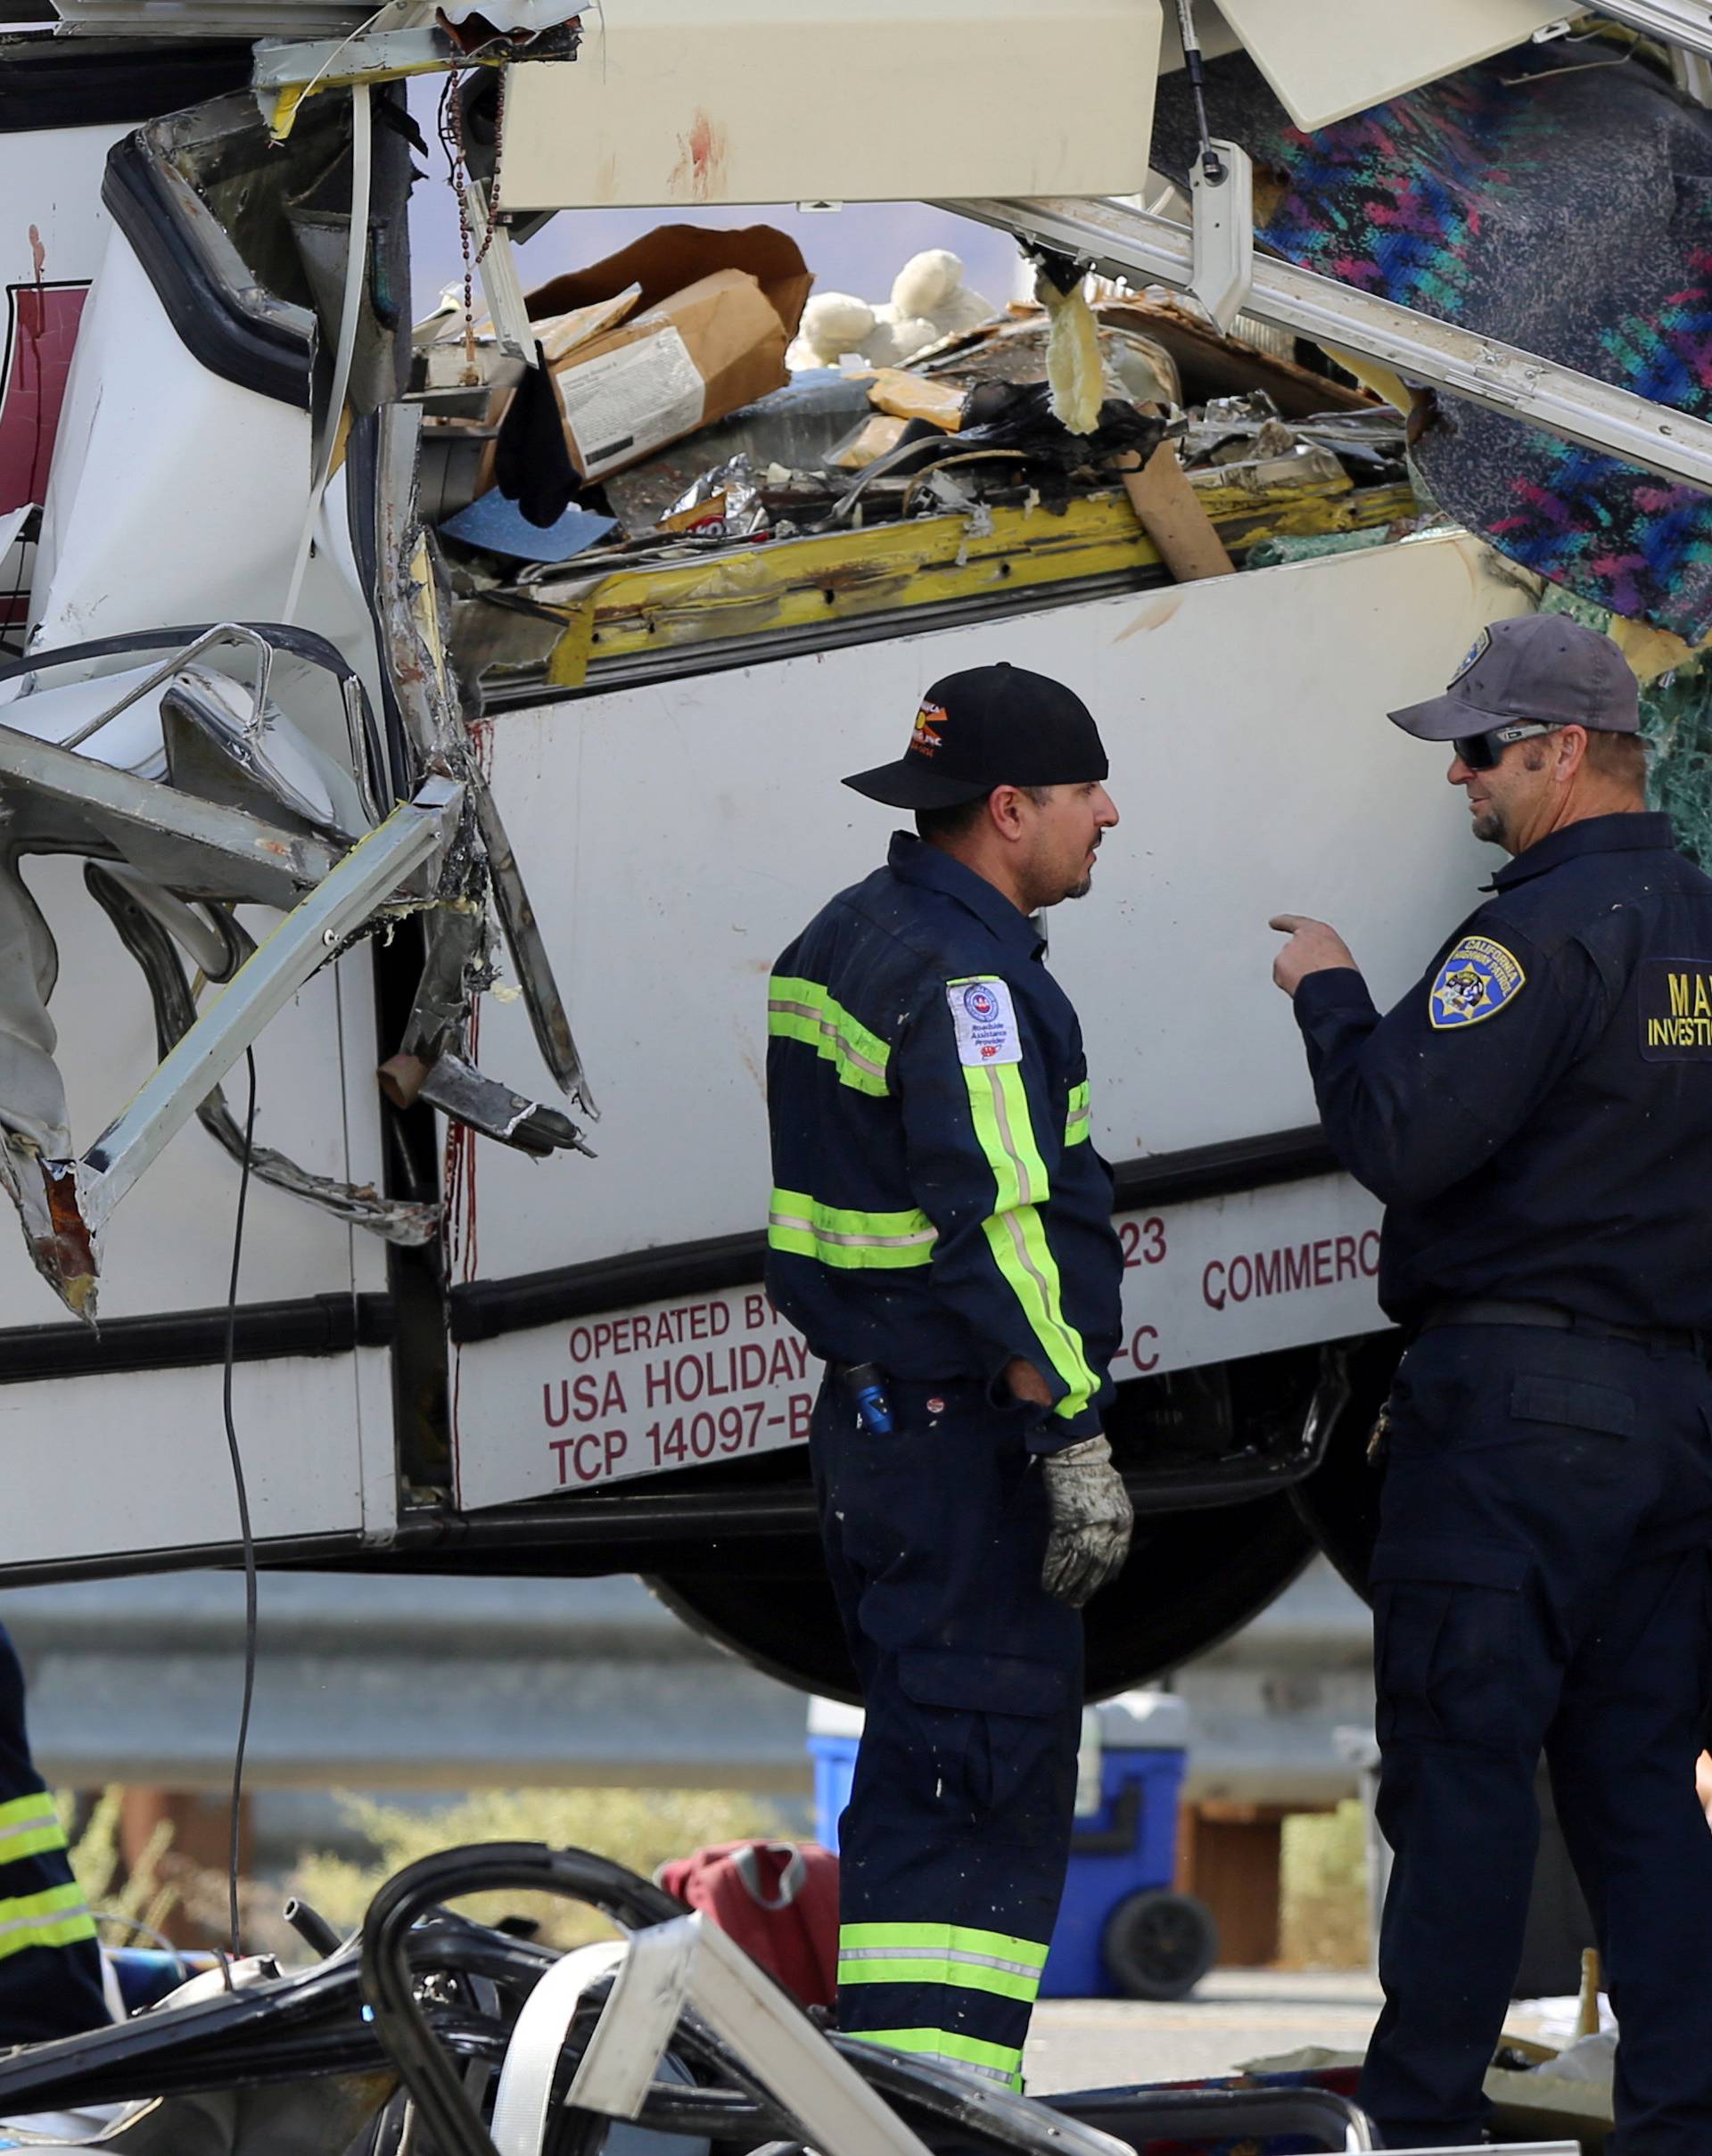 Investigators speak to each other at the scene of a mass casualty bus crash on the westbound Interstate 10 freeway near Palm Springs, California